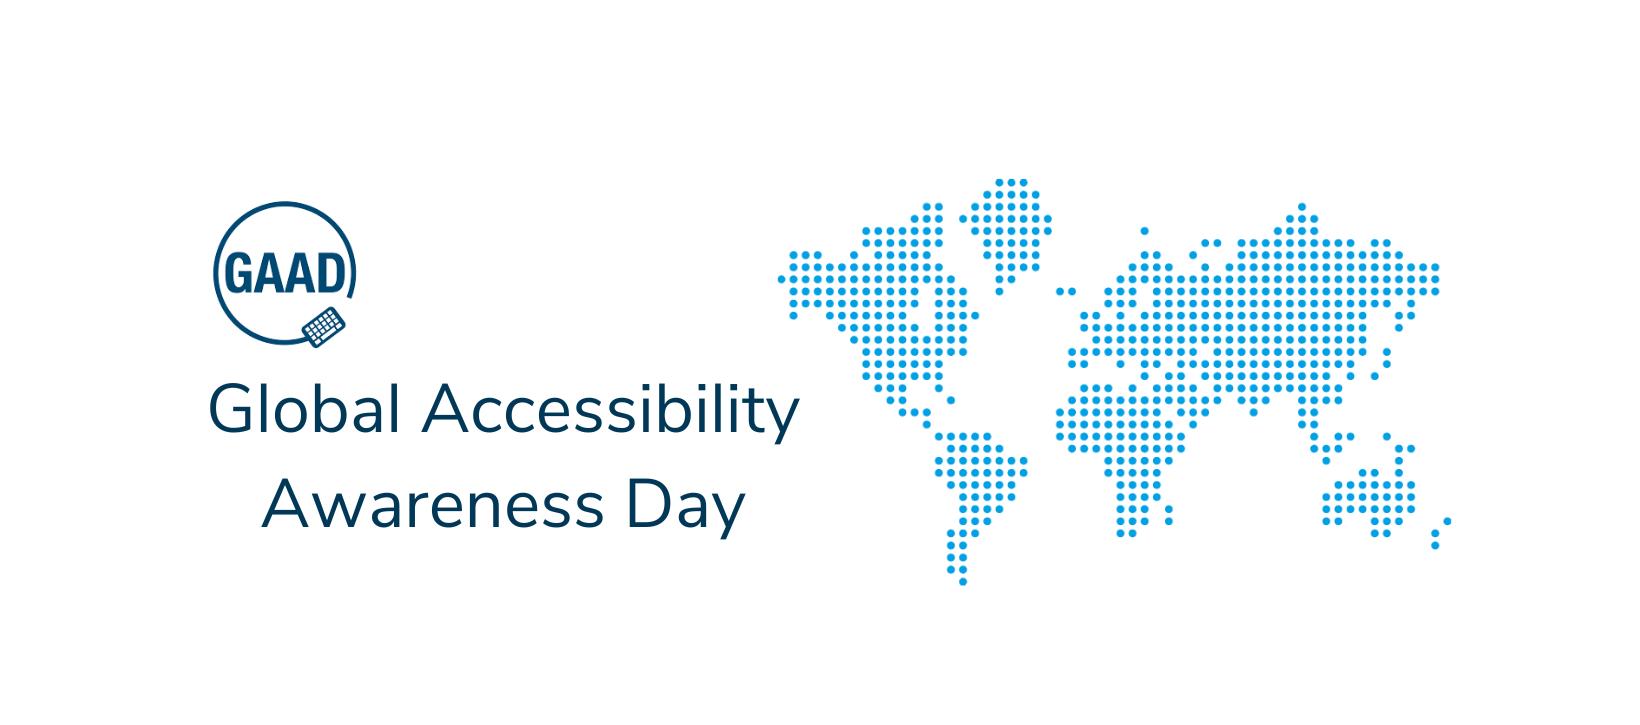 Global Accessibility Awareness Day Logo, featuring the capital letters GAAD in dark blue, surrounded by a dark blue circle with a dark blue laptop icon. Under the logo are the words 